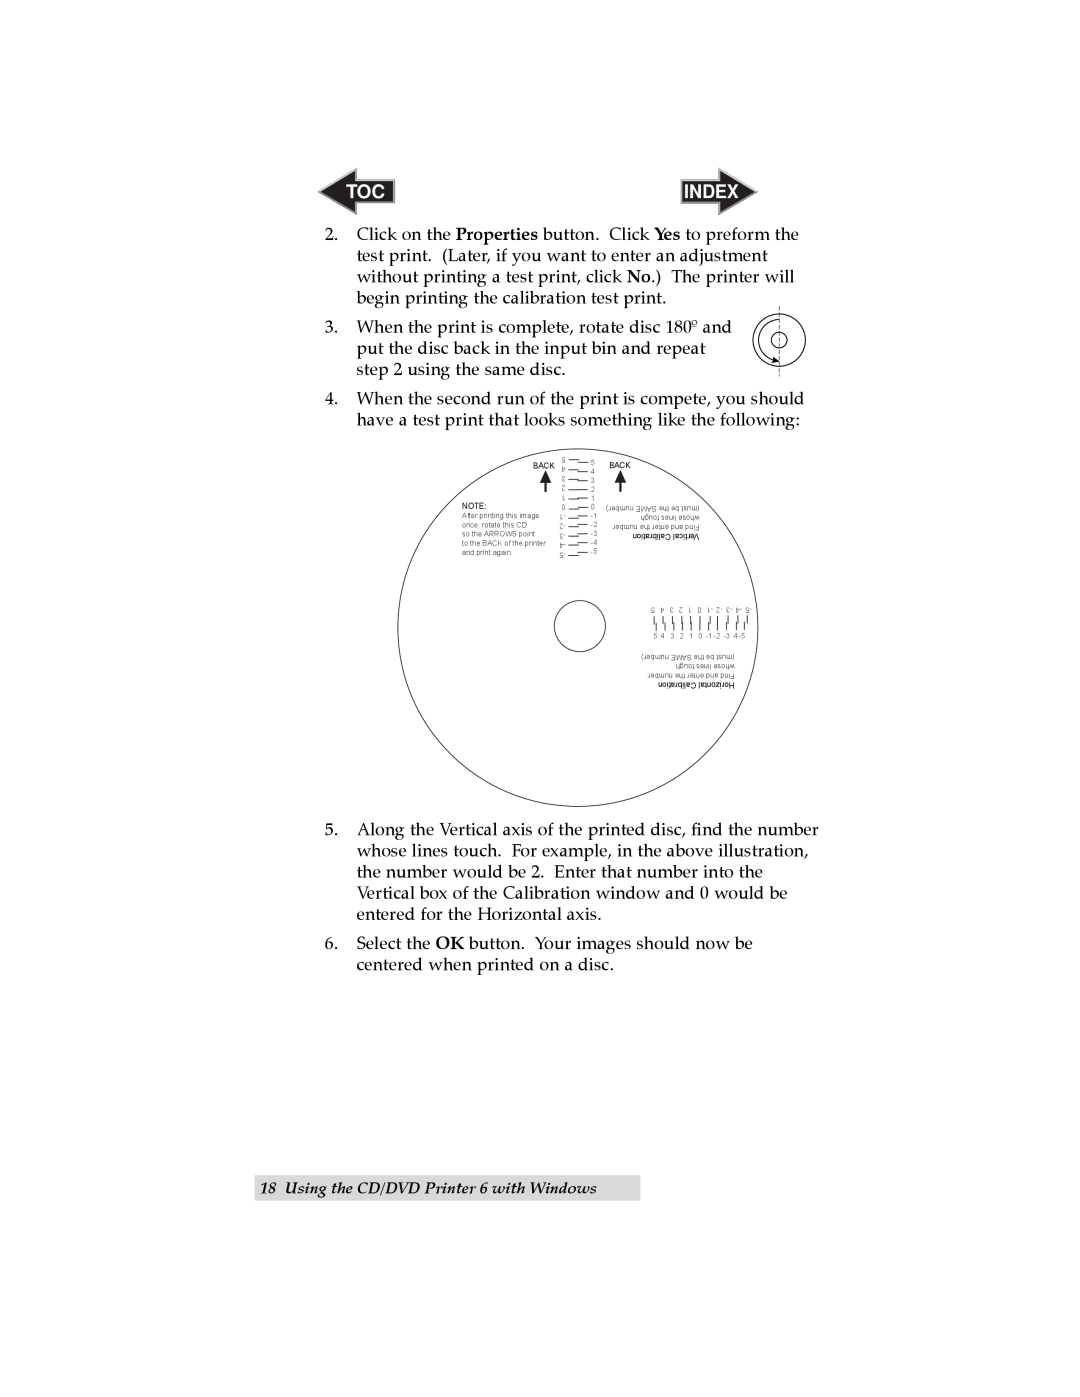 Primera Technology 6 user manual Index, using the same disc 